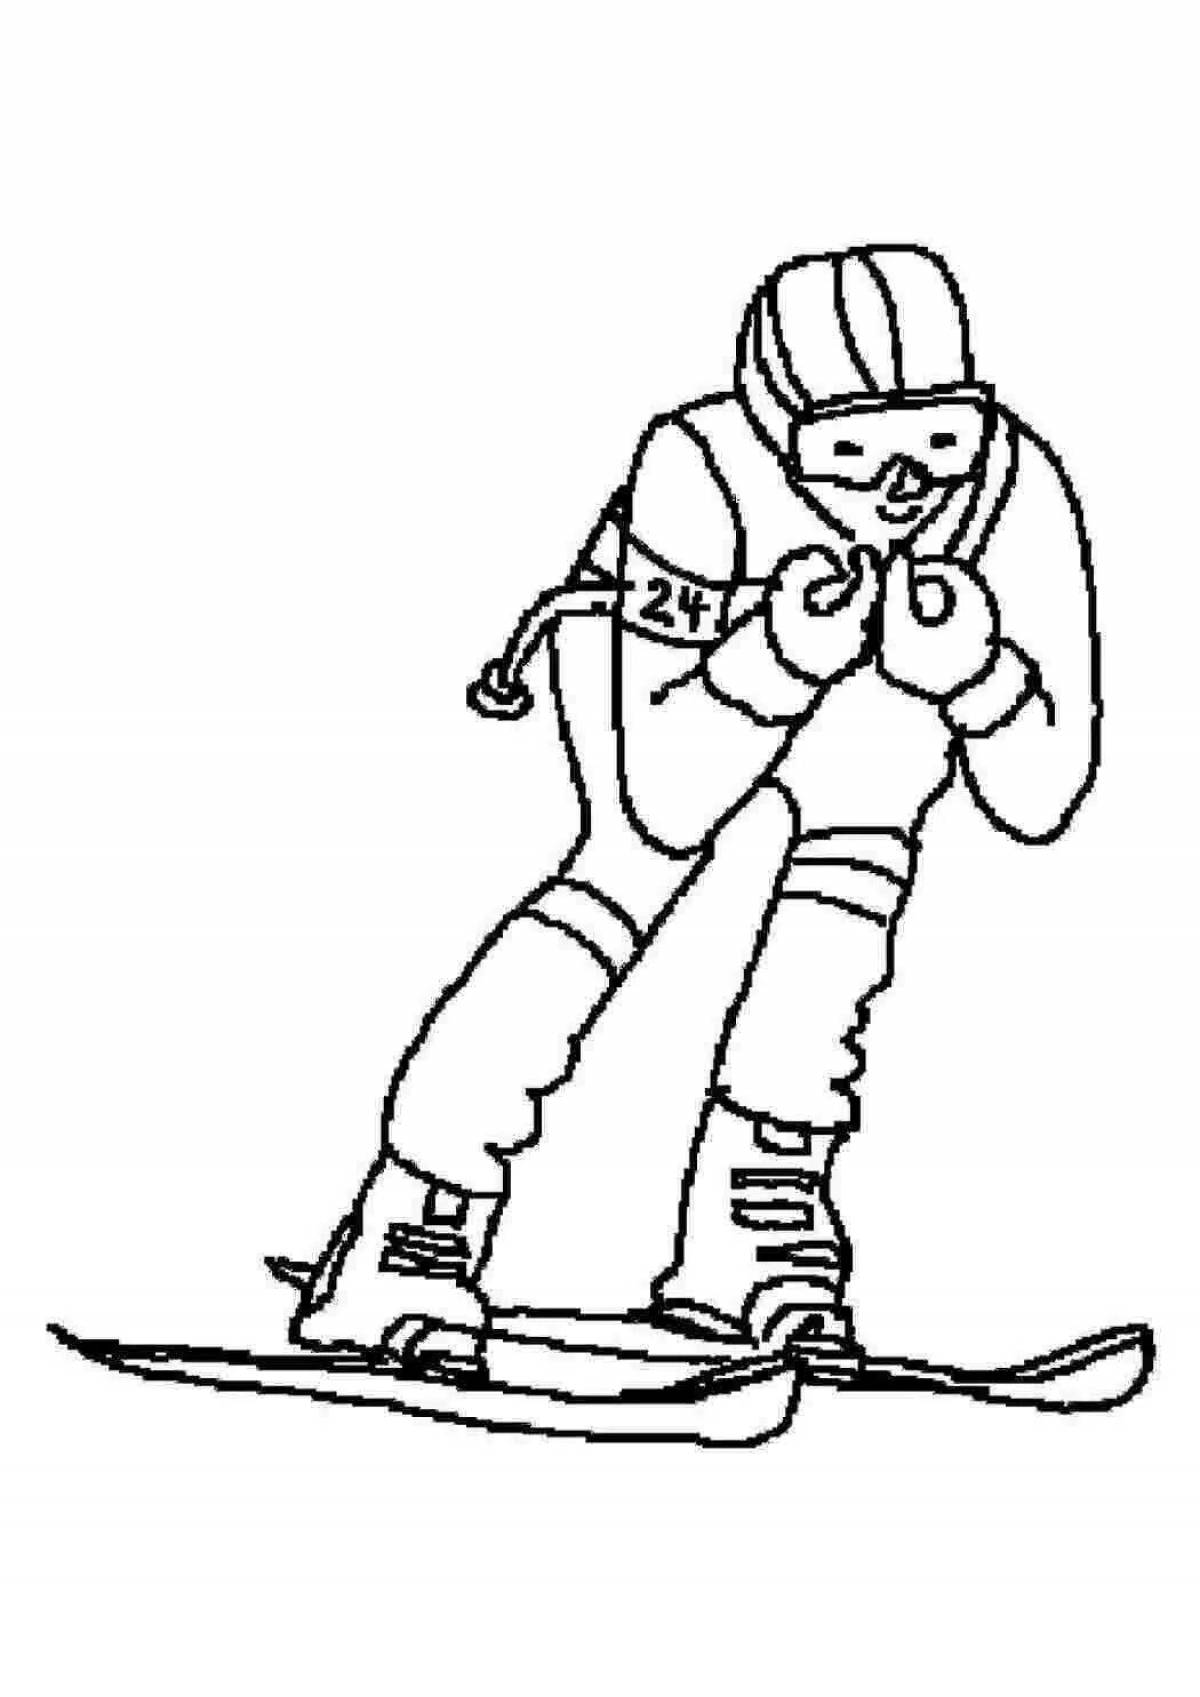 Coloring page sports boy on skis